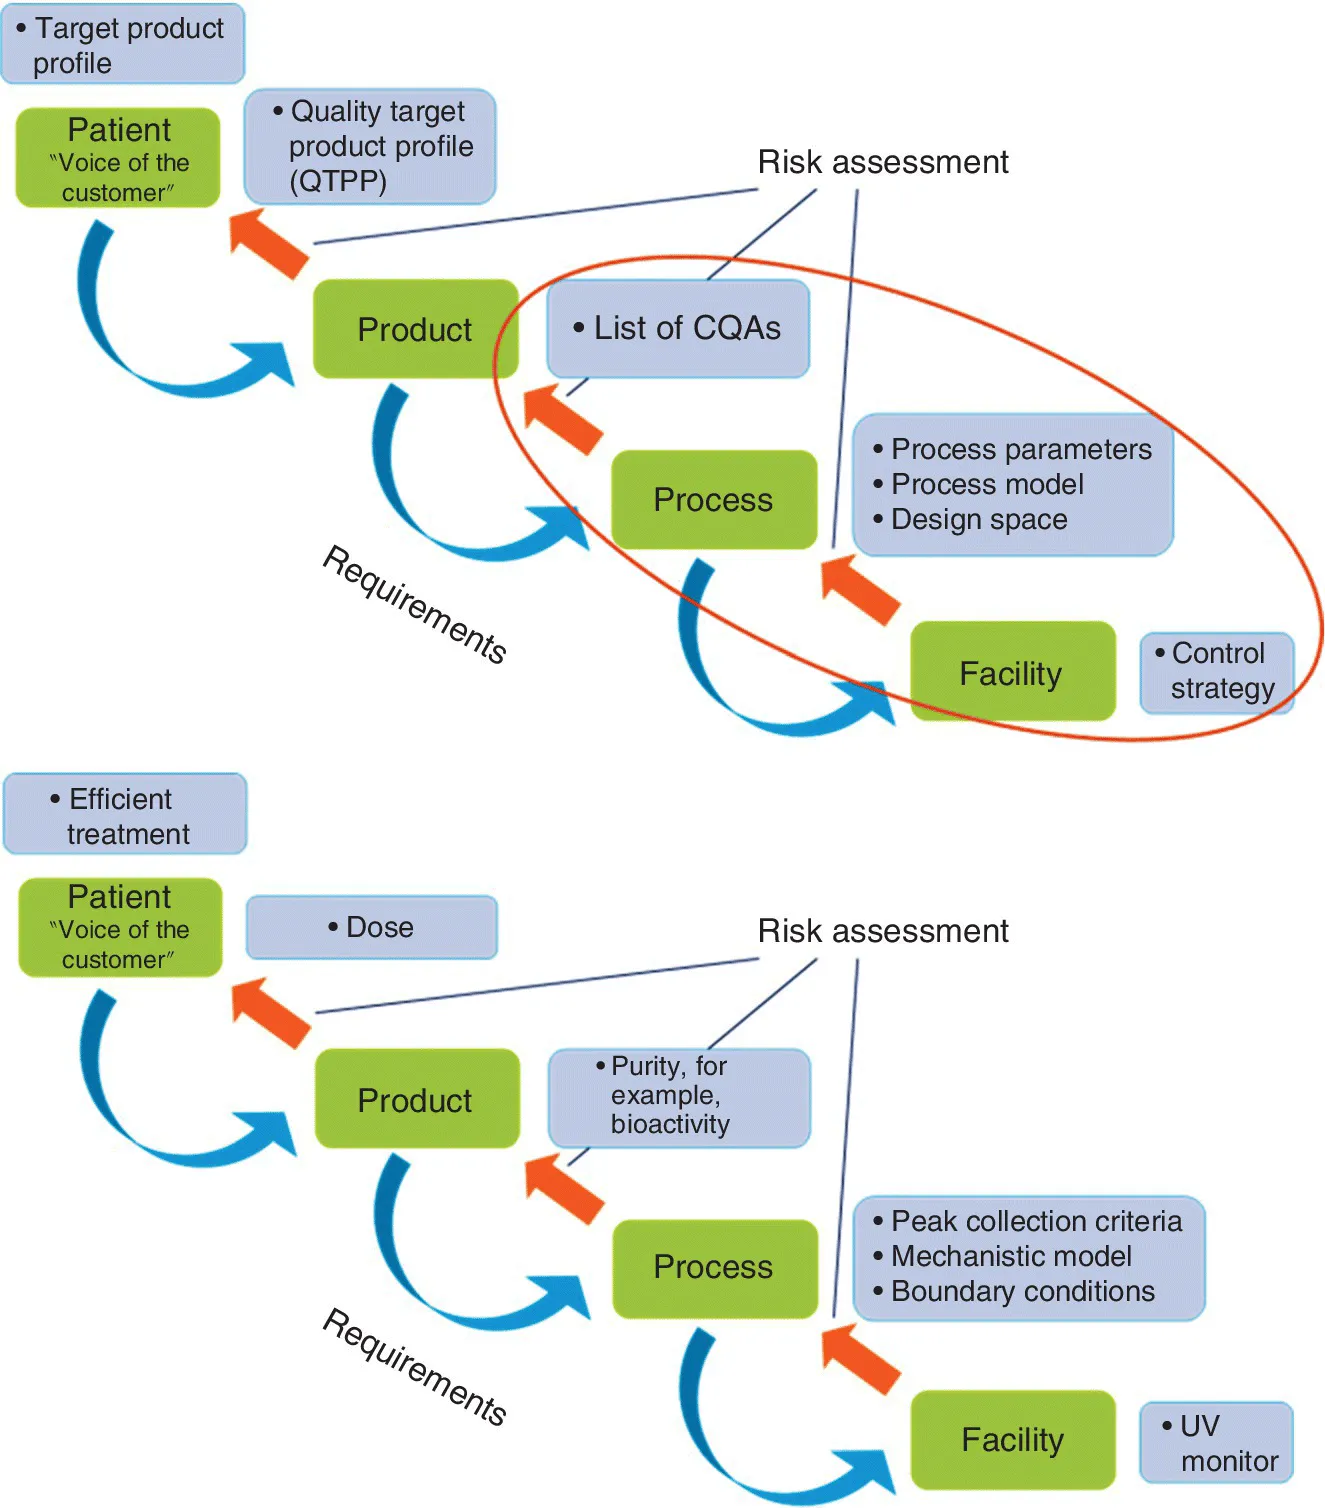 Flowcharts of the QbD framework (top) and the examples of QbD elements contained in the framework (bottom). Each indicate the risk assessment and requirements.